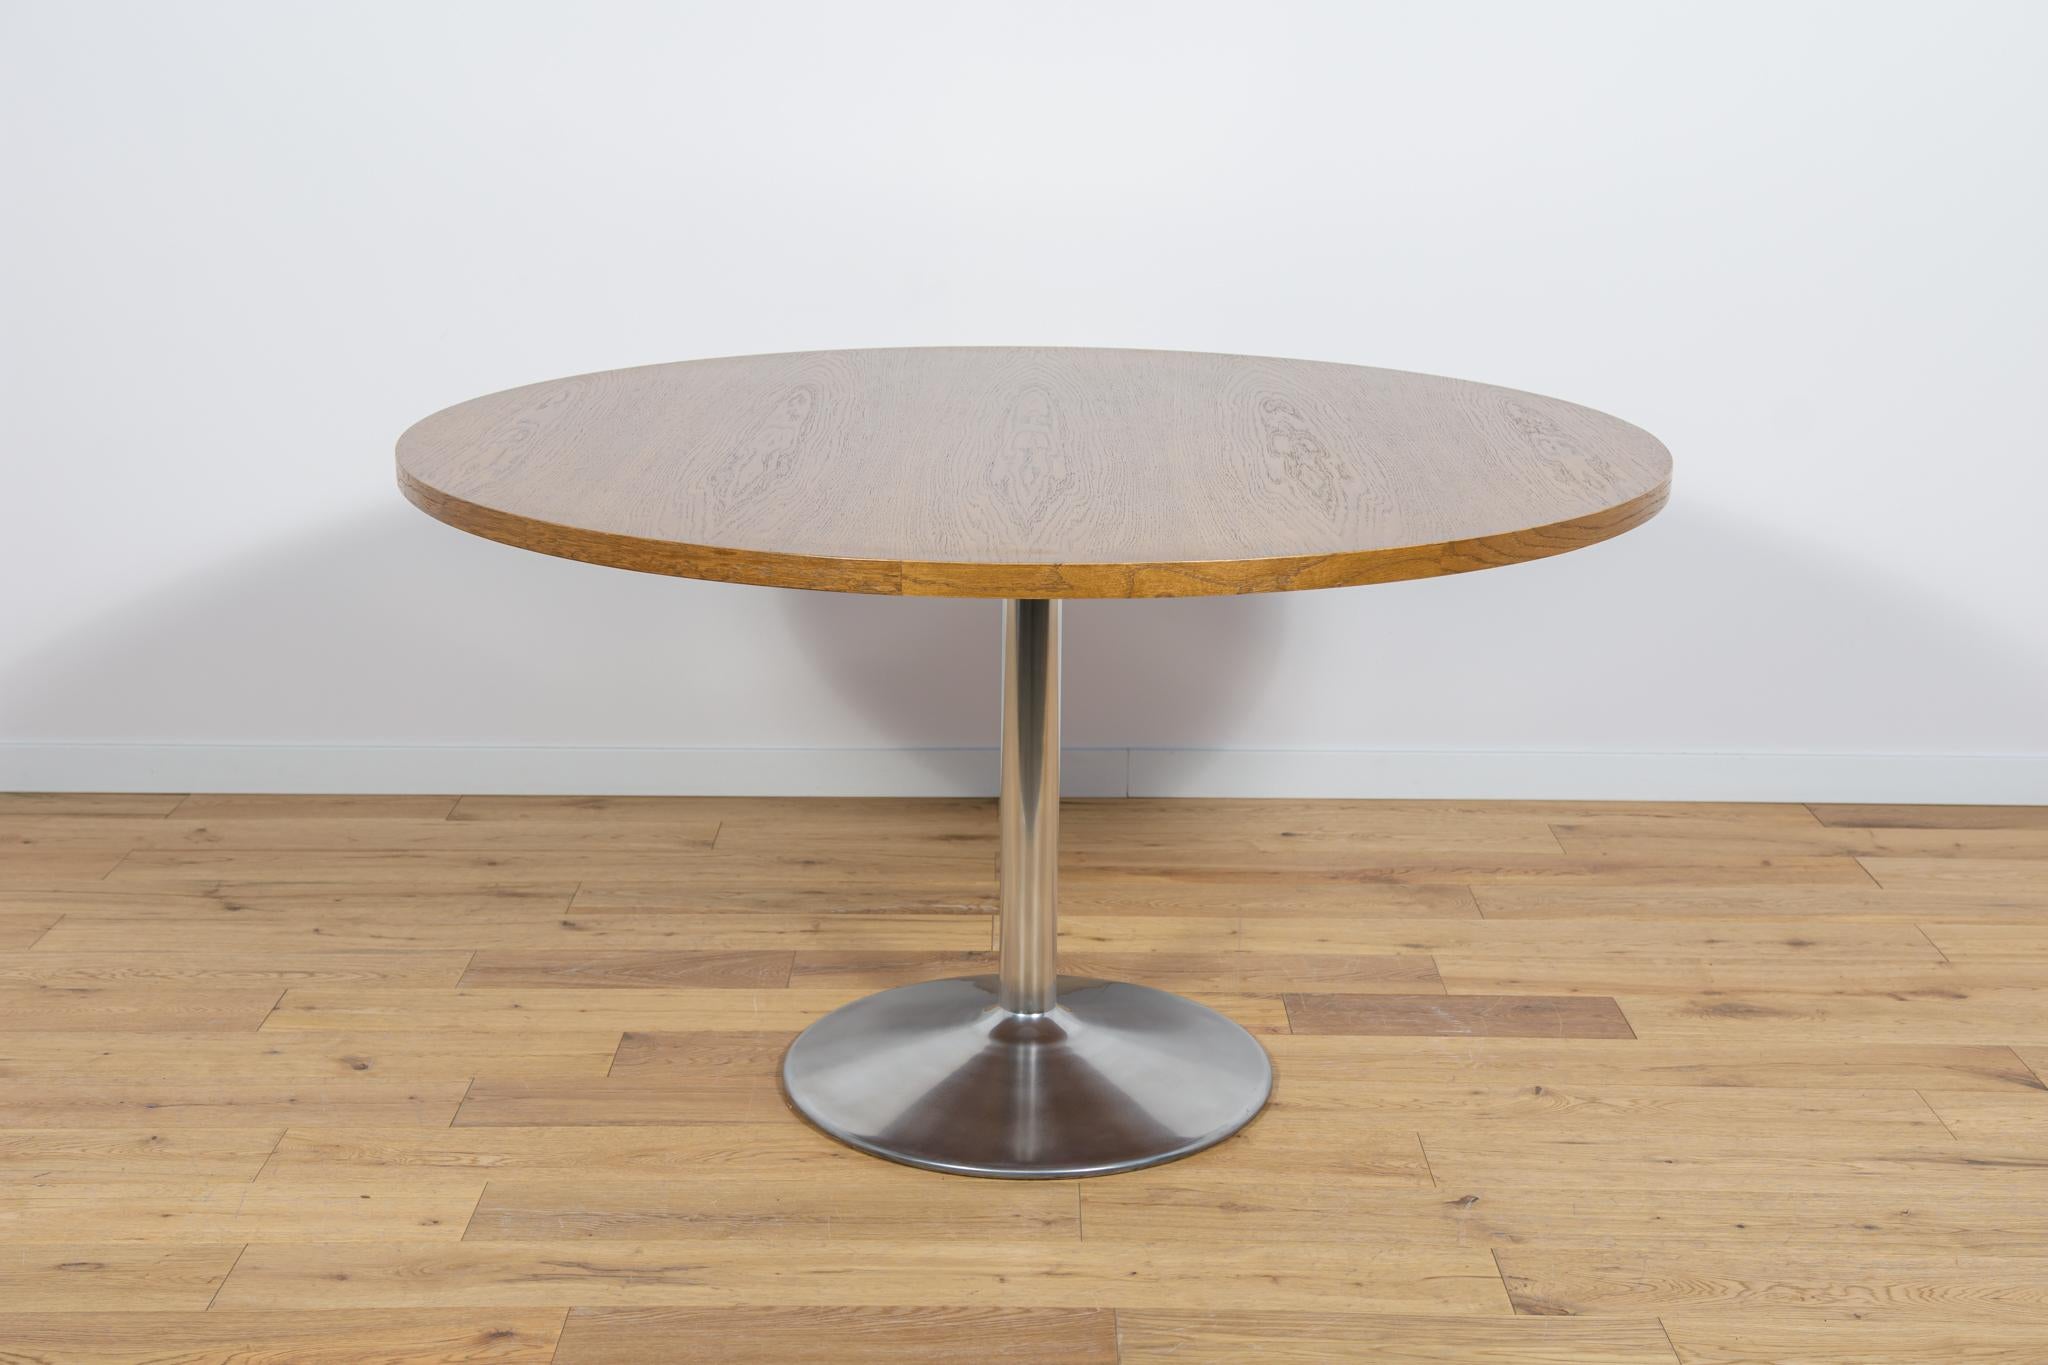 
The table was produced in Denmark in the 1970s. Table top made of oak veneer. The furniture is after a comprehensive carpentry renovation, cleaned of the old coating, finished with high-quality Danish Oil. The table base is made of aluminum has